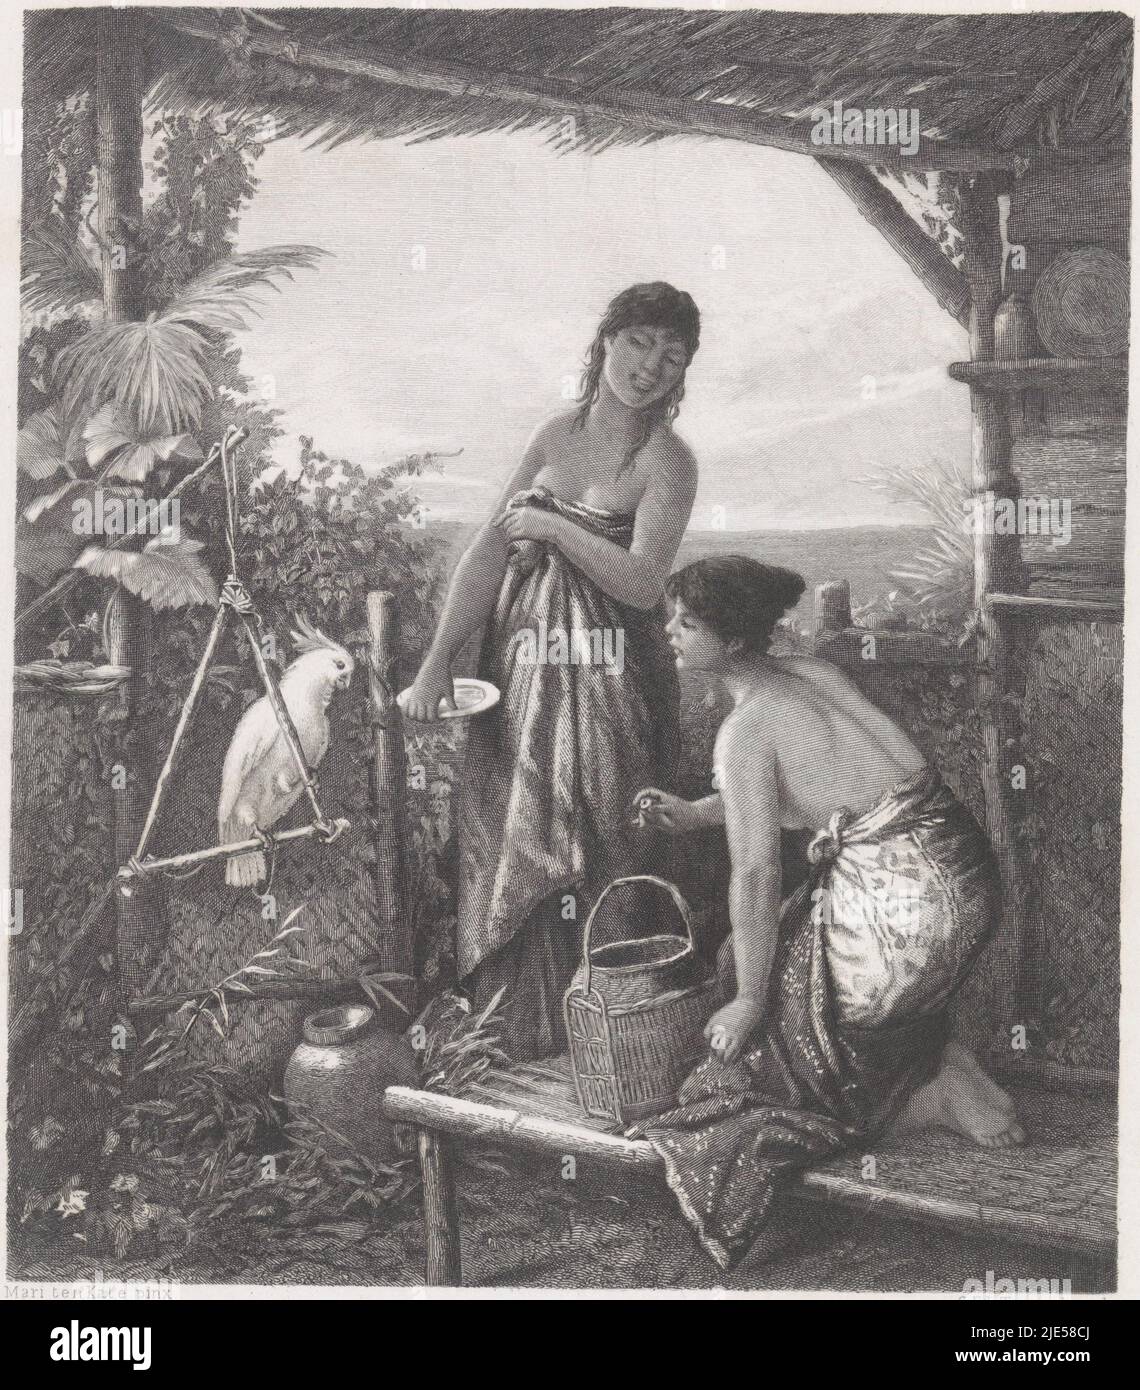 Two young Indonesian women at a parrot Inland pastime, print maker: Edouard Taurel, (mentioned on object), after: Mari ten Kate, (mentioned on object), Amsterdam, 1841 - 1892, paper, steel engraving, h 280 mm × w 223 mm Stock Photo